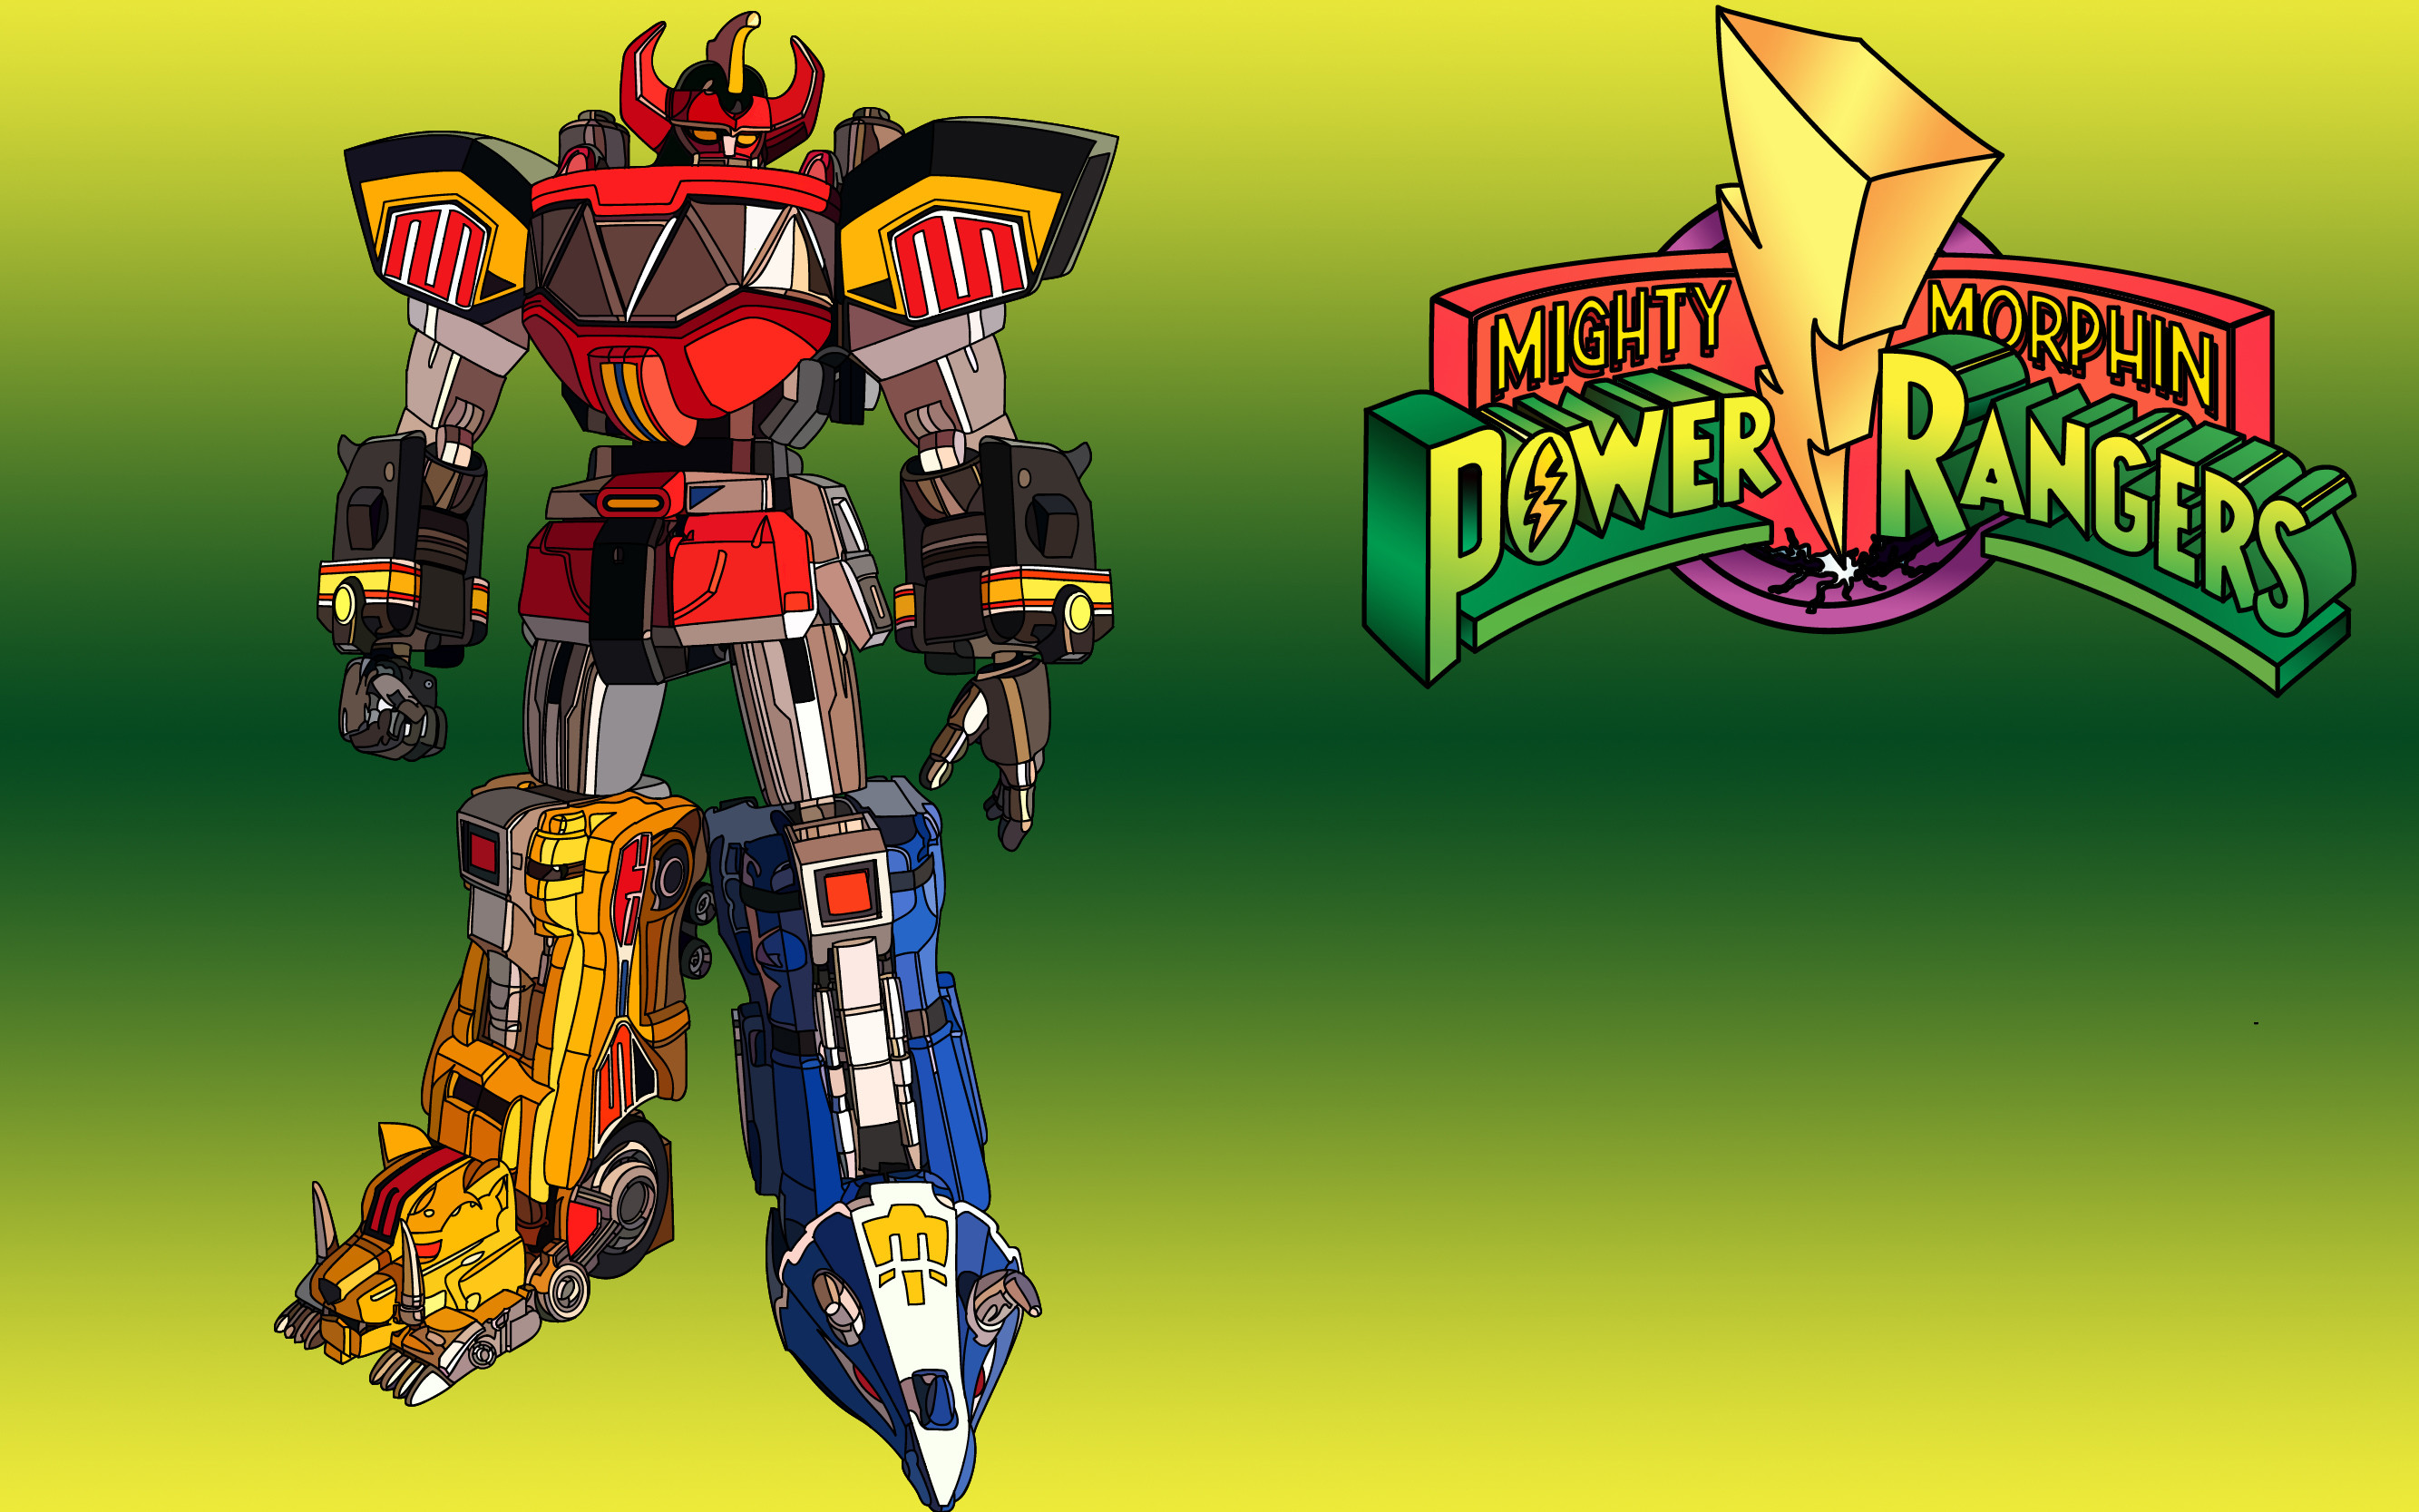 Mighty Morphin Power Rangers Megazord by LegendarySuperman Mighty Morphin Power Rangers Megazord by LegendarySuperman